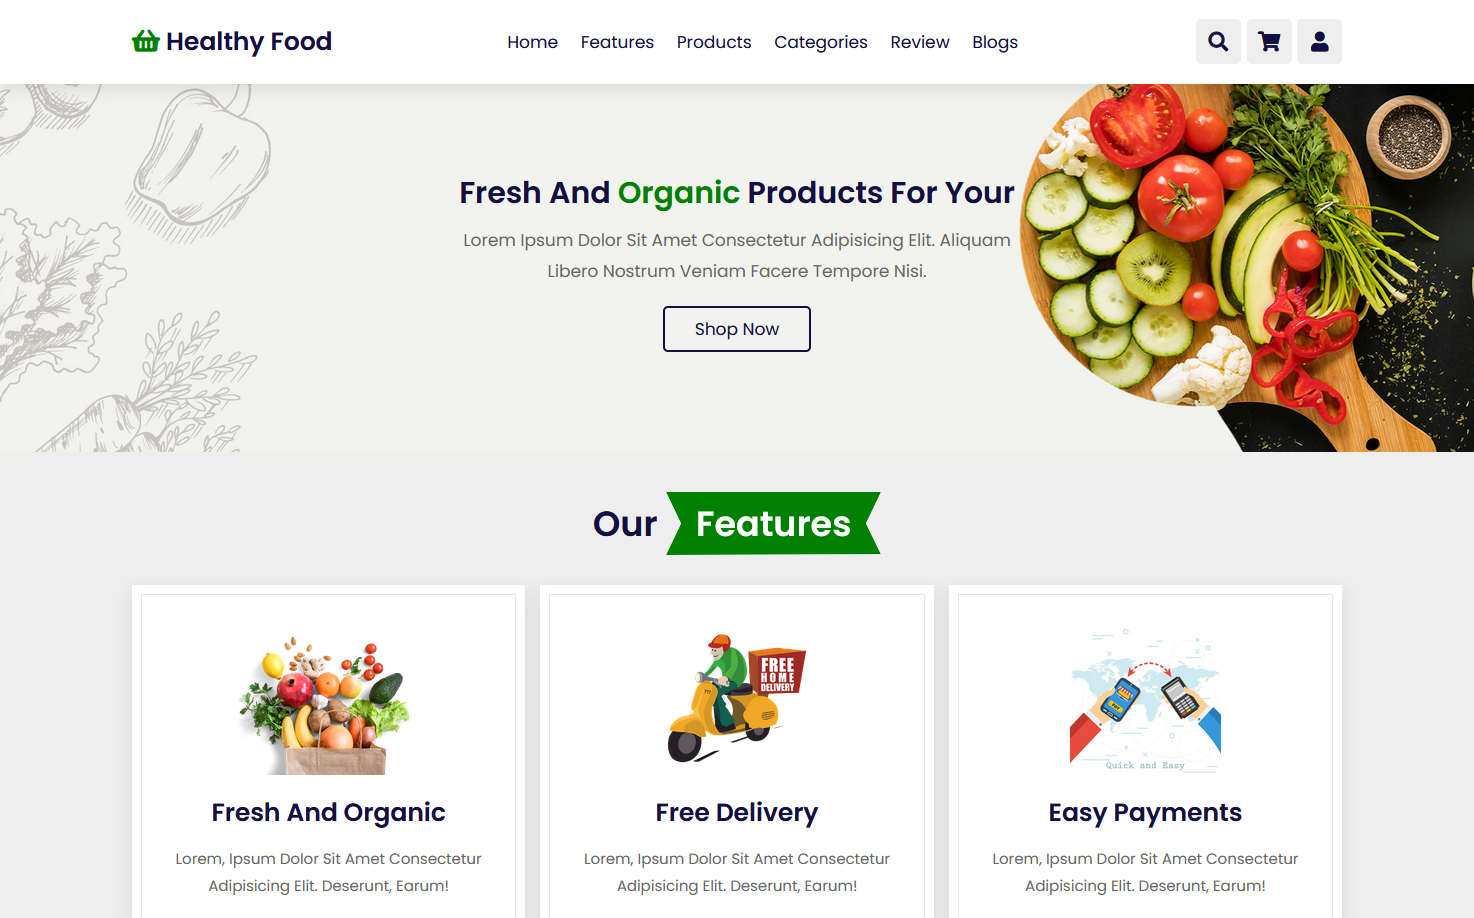 Vegetable Firm - Grocery Store Website Design Using HTML - CSS - JavaScript-100% Free Download